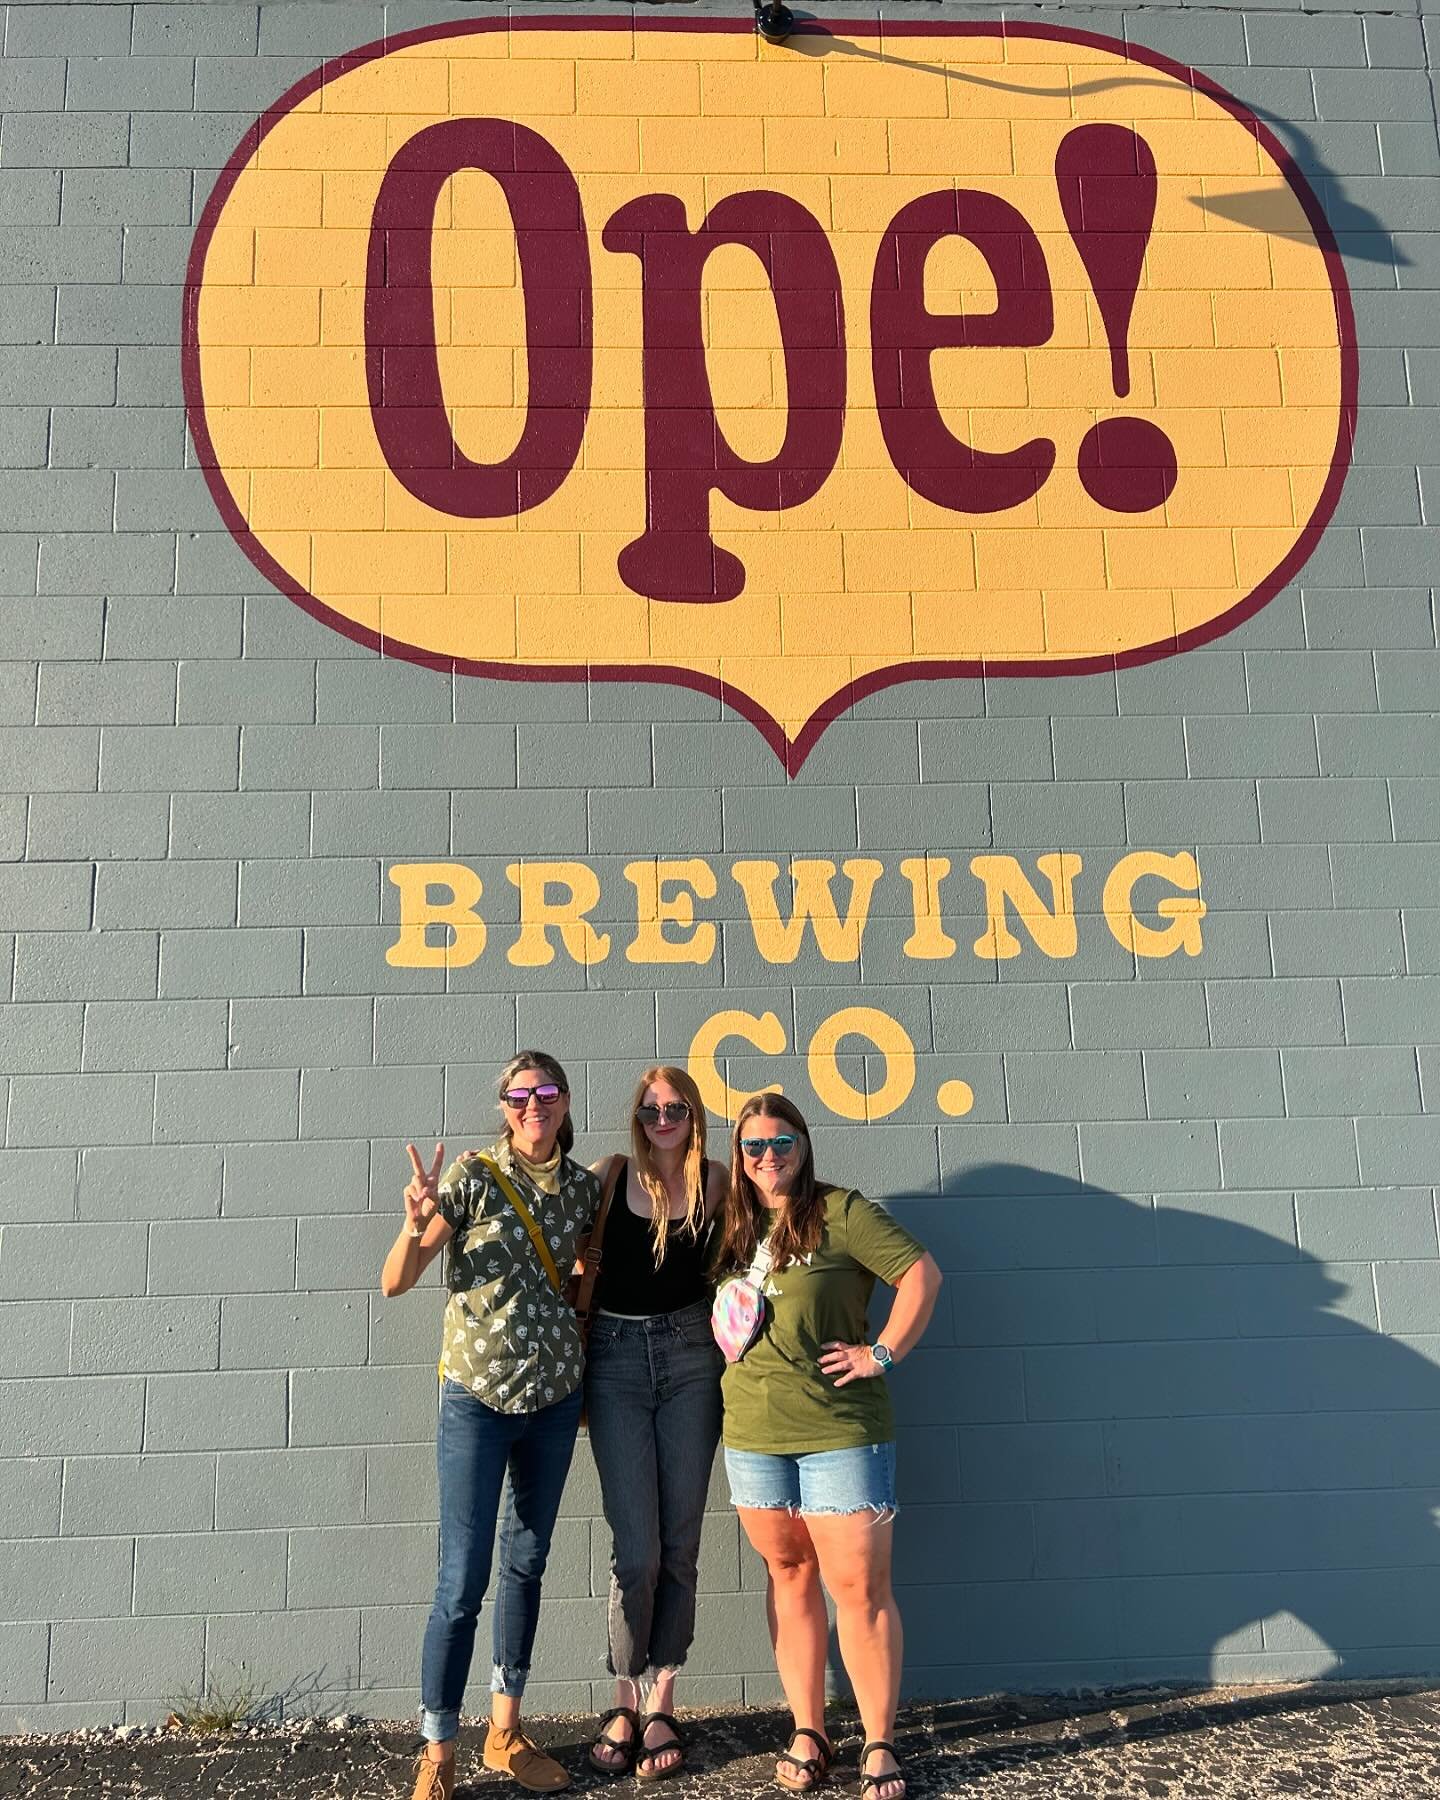 🍻Ope! We are THRILLED to announce you&rsquo;ll be seeing us a lot this summer @opebrewingco who we love and also are our neighbors! 🙋🏻&zwj;♀️

🏐 Catch us tomorrow for Wednesday night volleyball 5-8 slangin that wood-fired good good AND we&rsquo;r